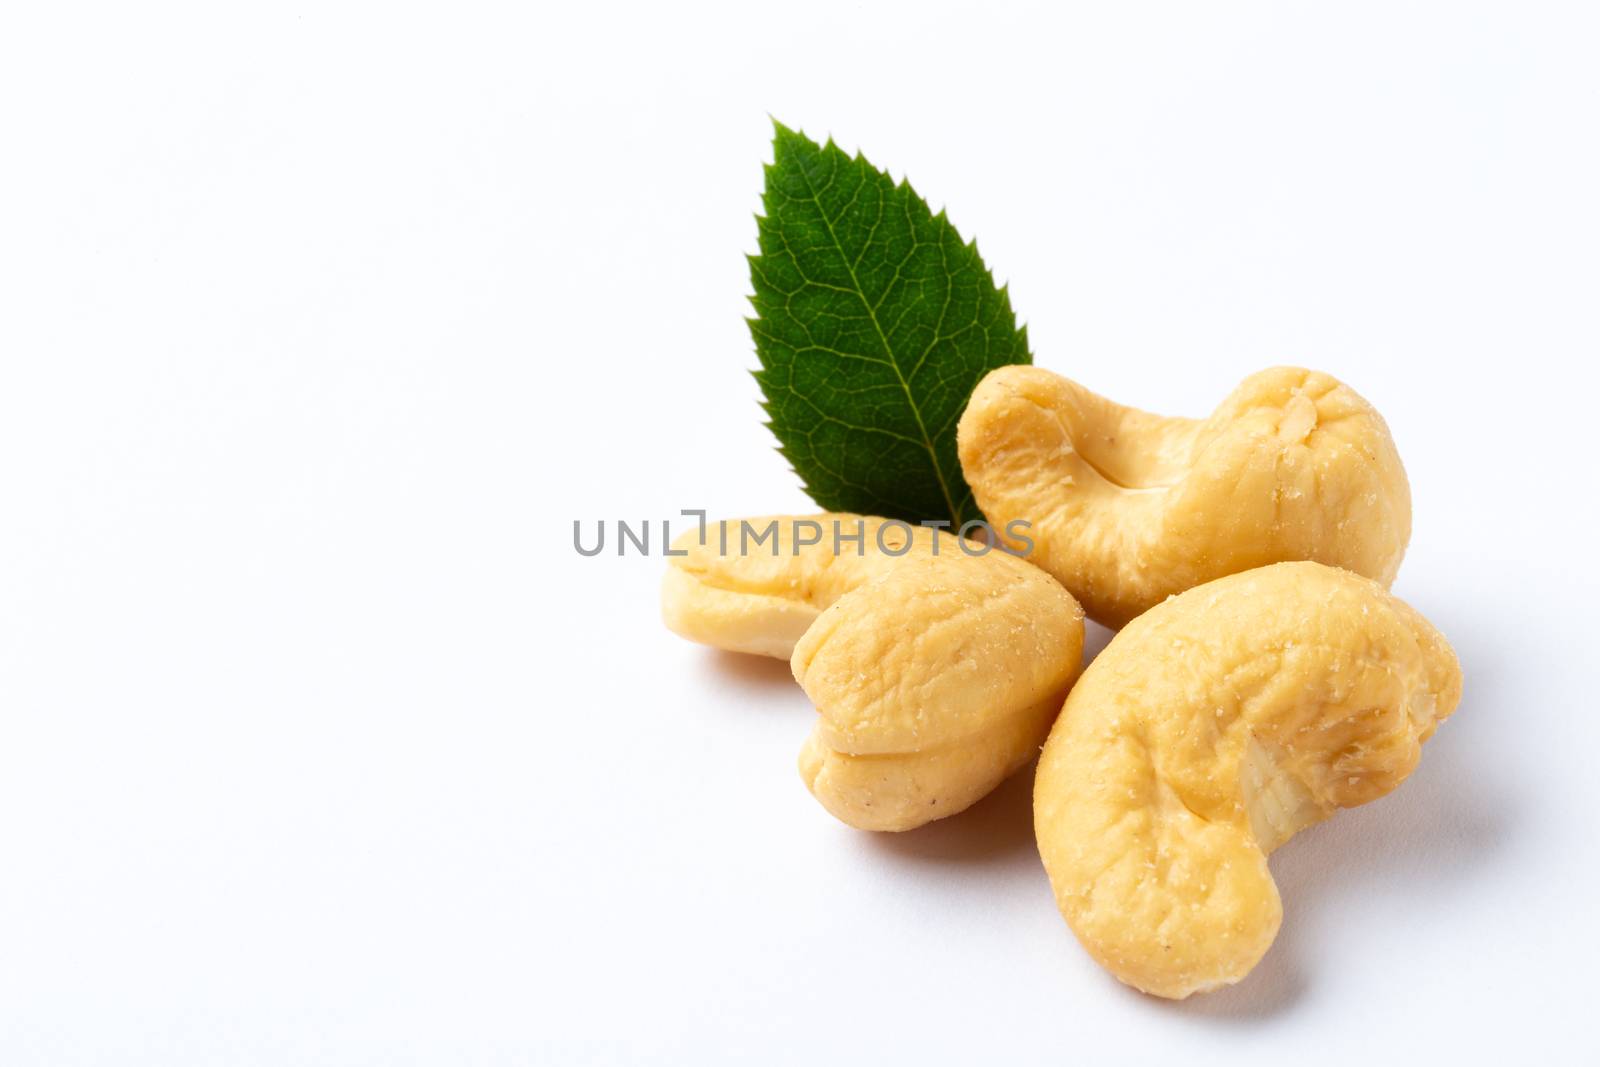 A Cashew nuts with a green leaf on white background